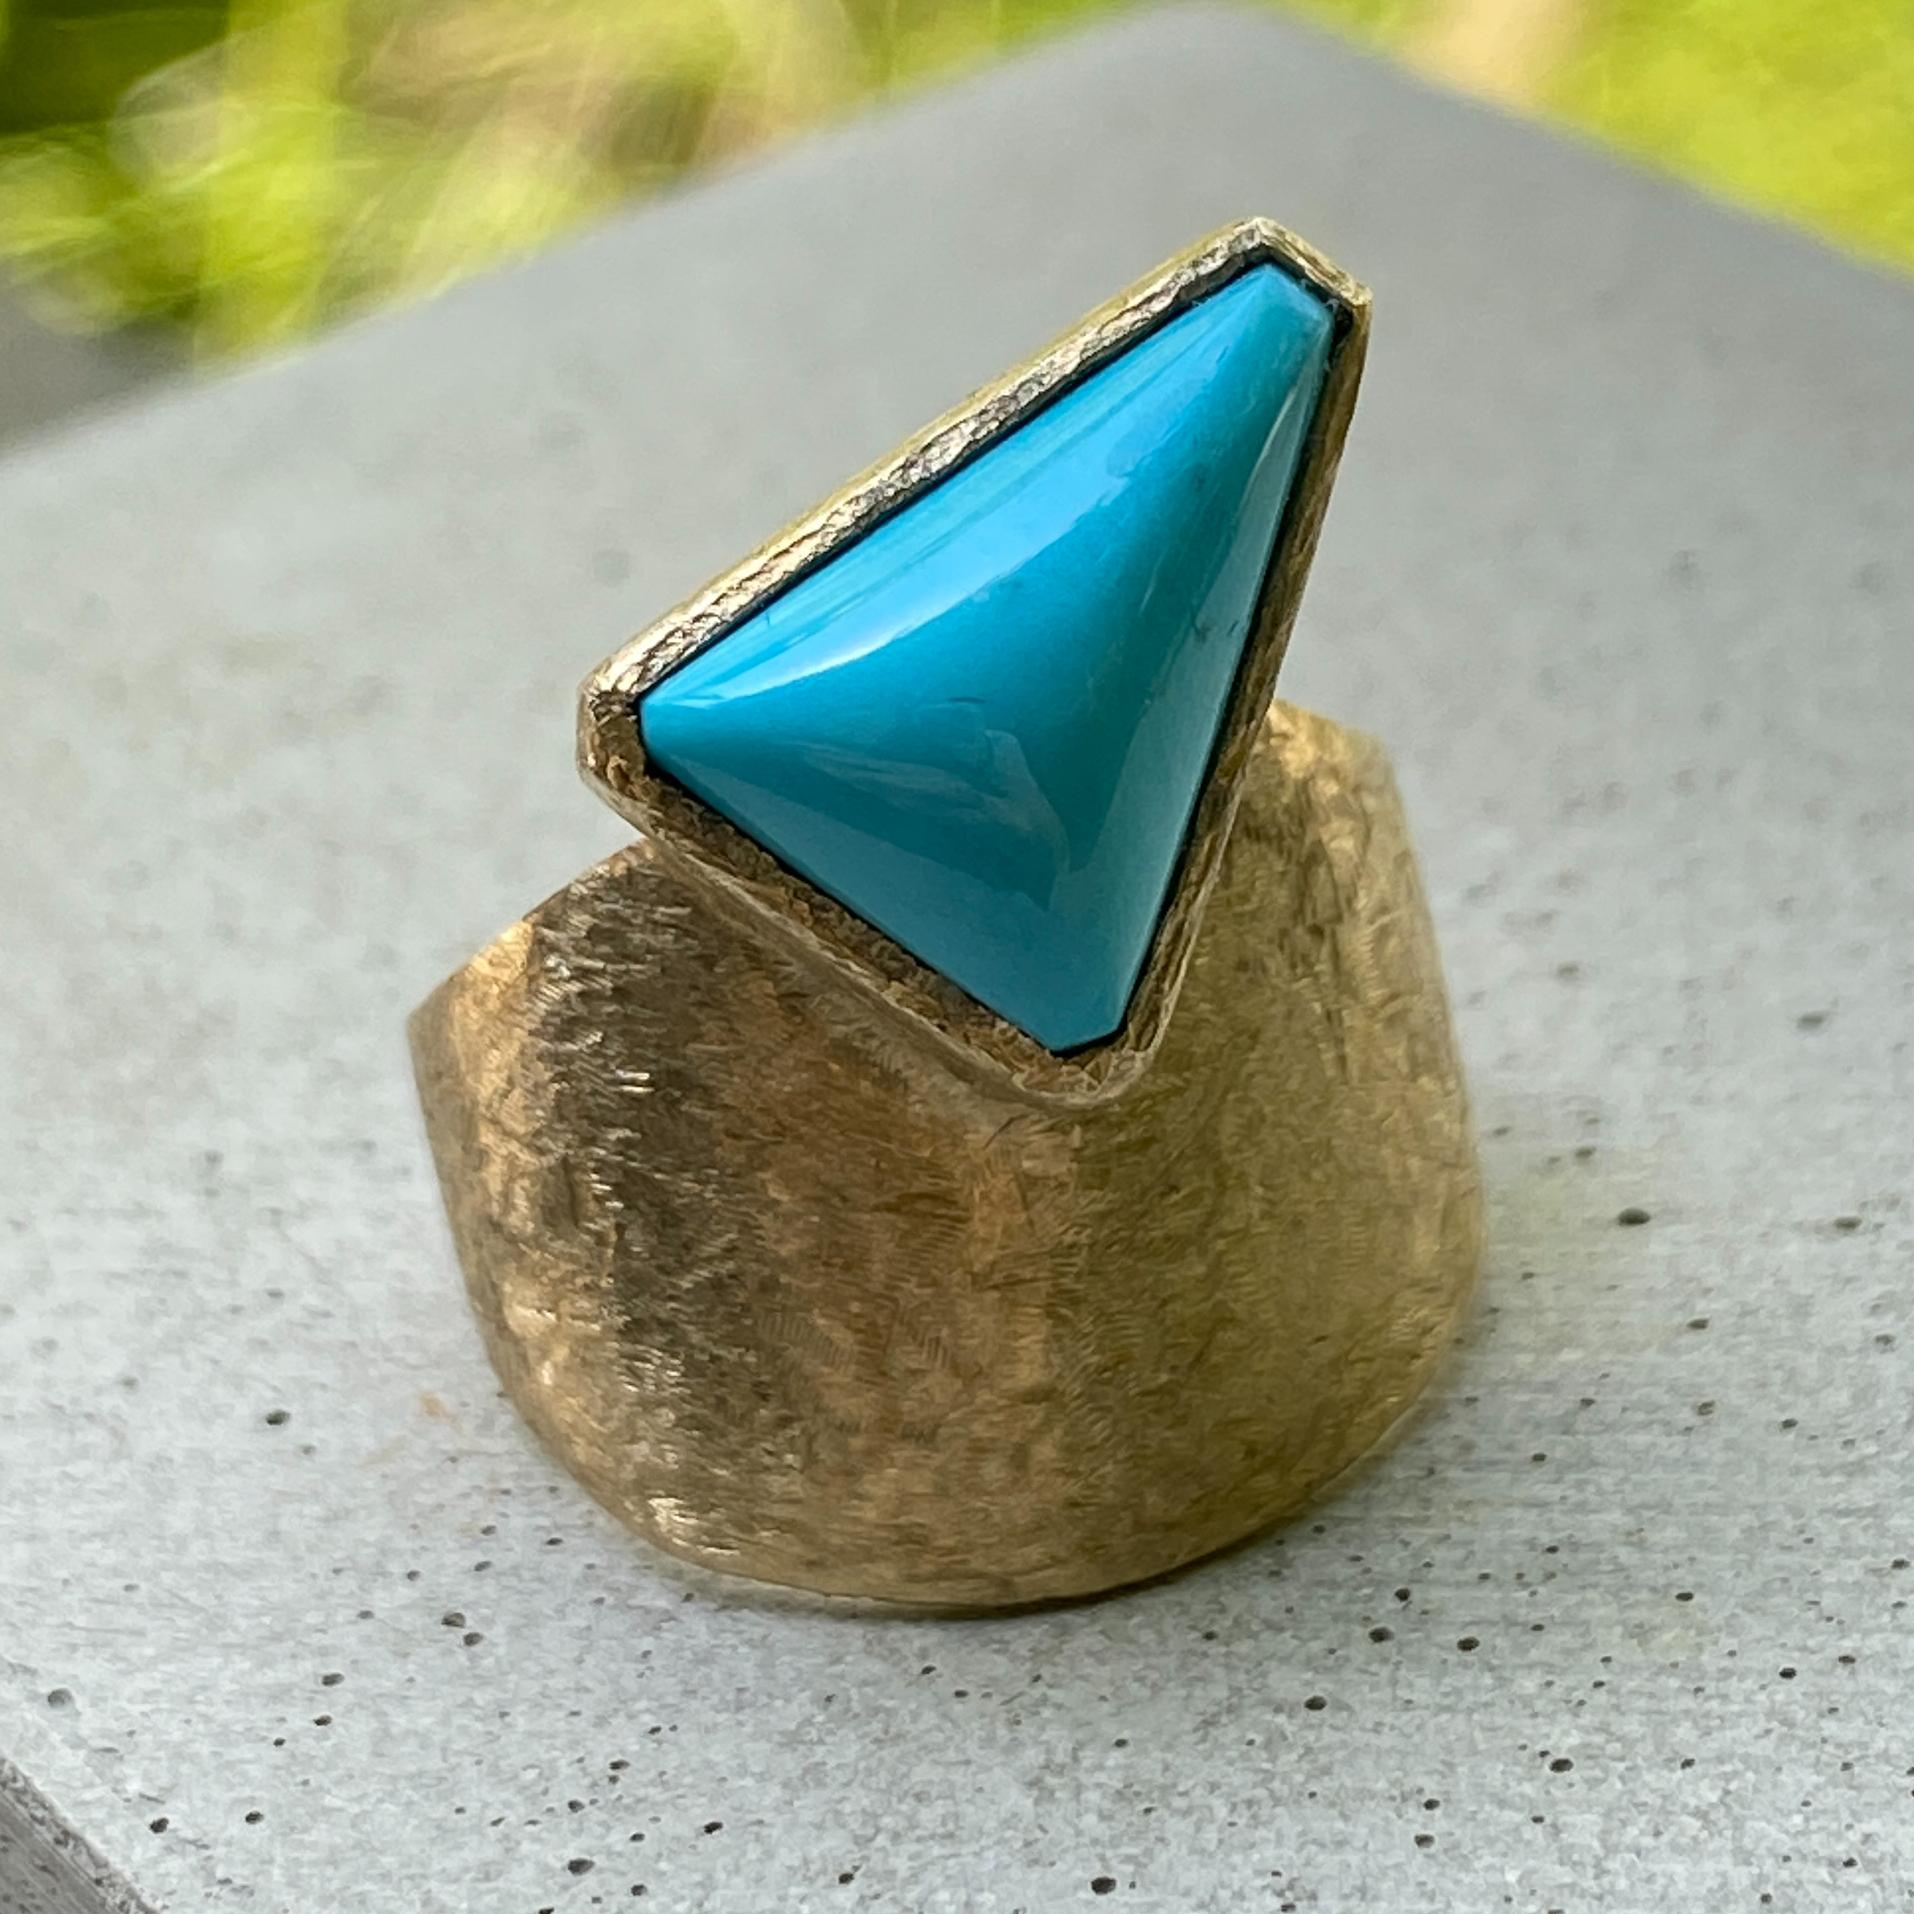 This abstract and unusual ring was designed, set and finished by Eytan Brandes.  It features a triangular cabochon of genuine Sleeping Beauty Turquoise on a bezel platform rising from a gorgeous tapered band in 14K yellow gold.  The band has a